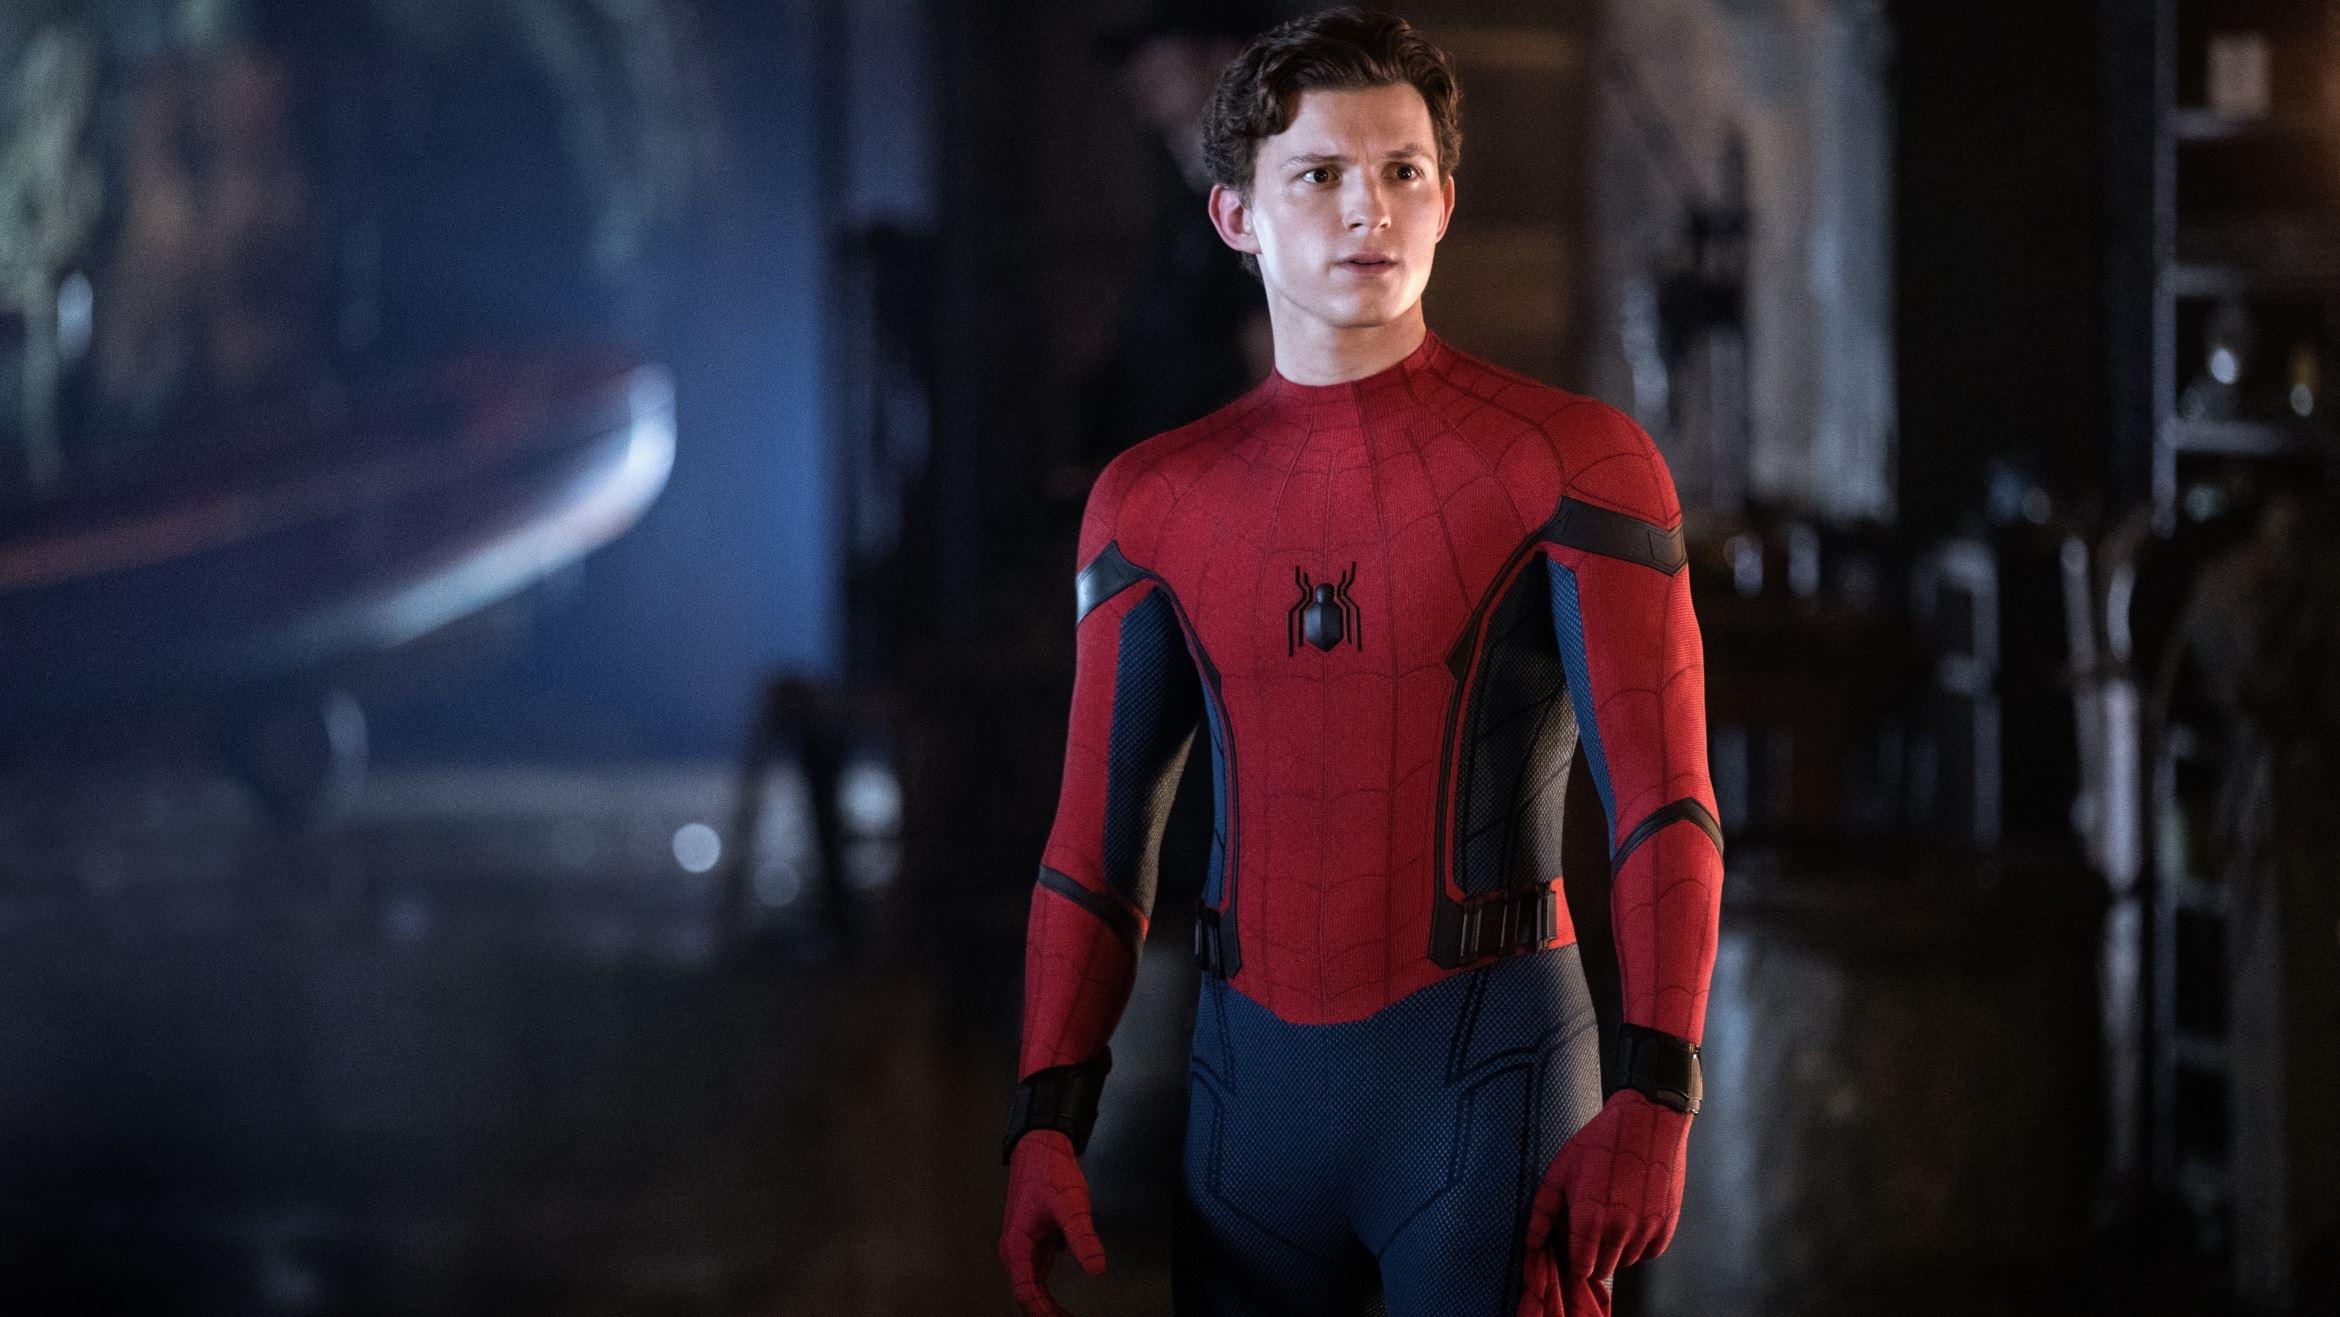 Tom Holland in "Spider-Man: Far from Home" - 